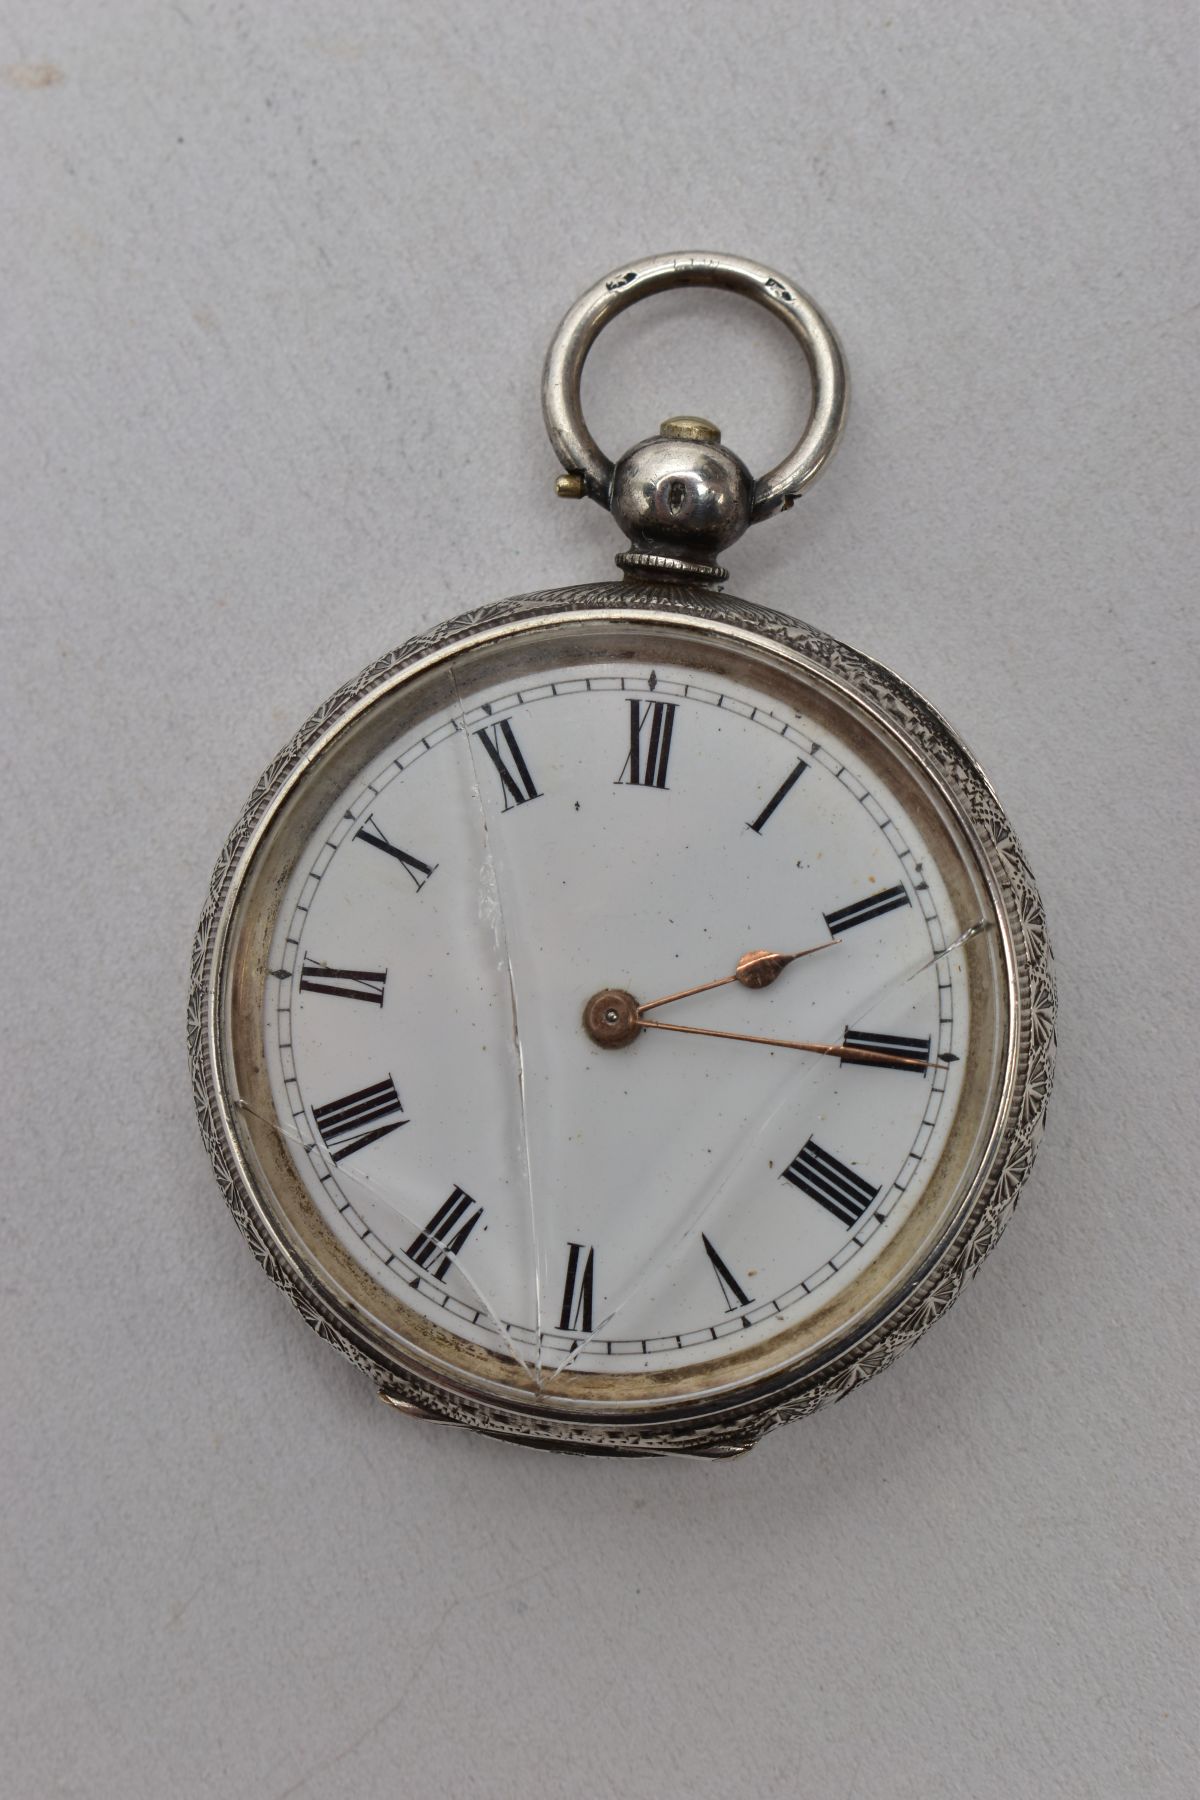 TWO EARLY 20TH CENTURY SILVER OPEN FACE POCKET WATCHES, both with white faces and black Roman - Image 6 of 9